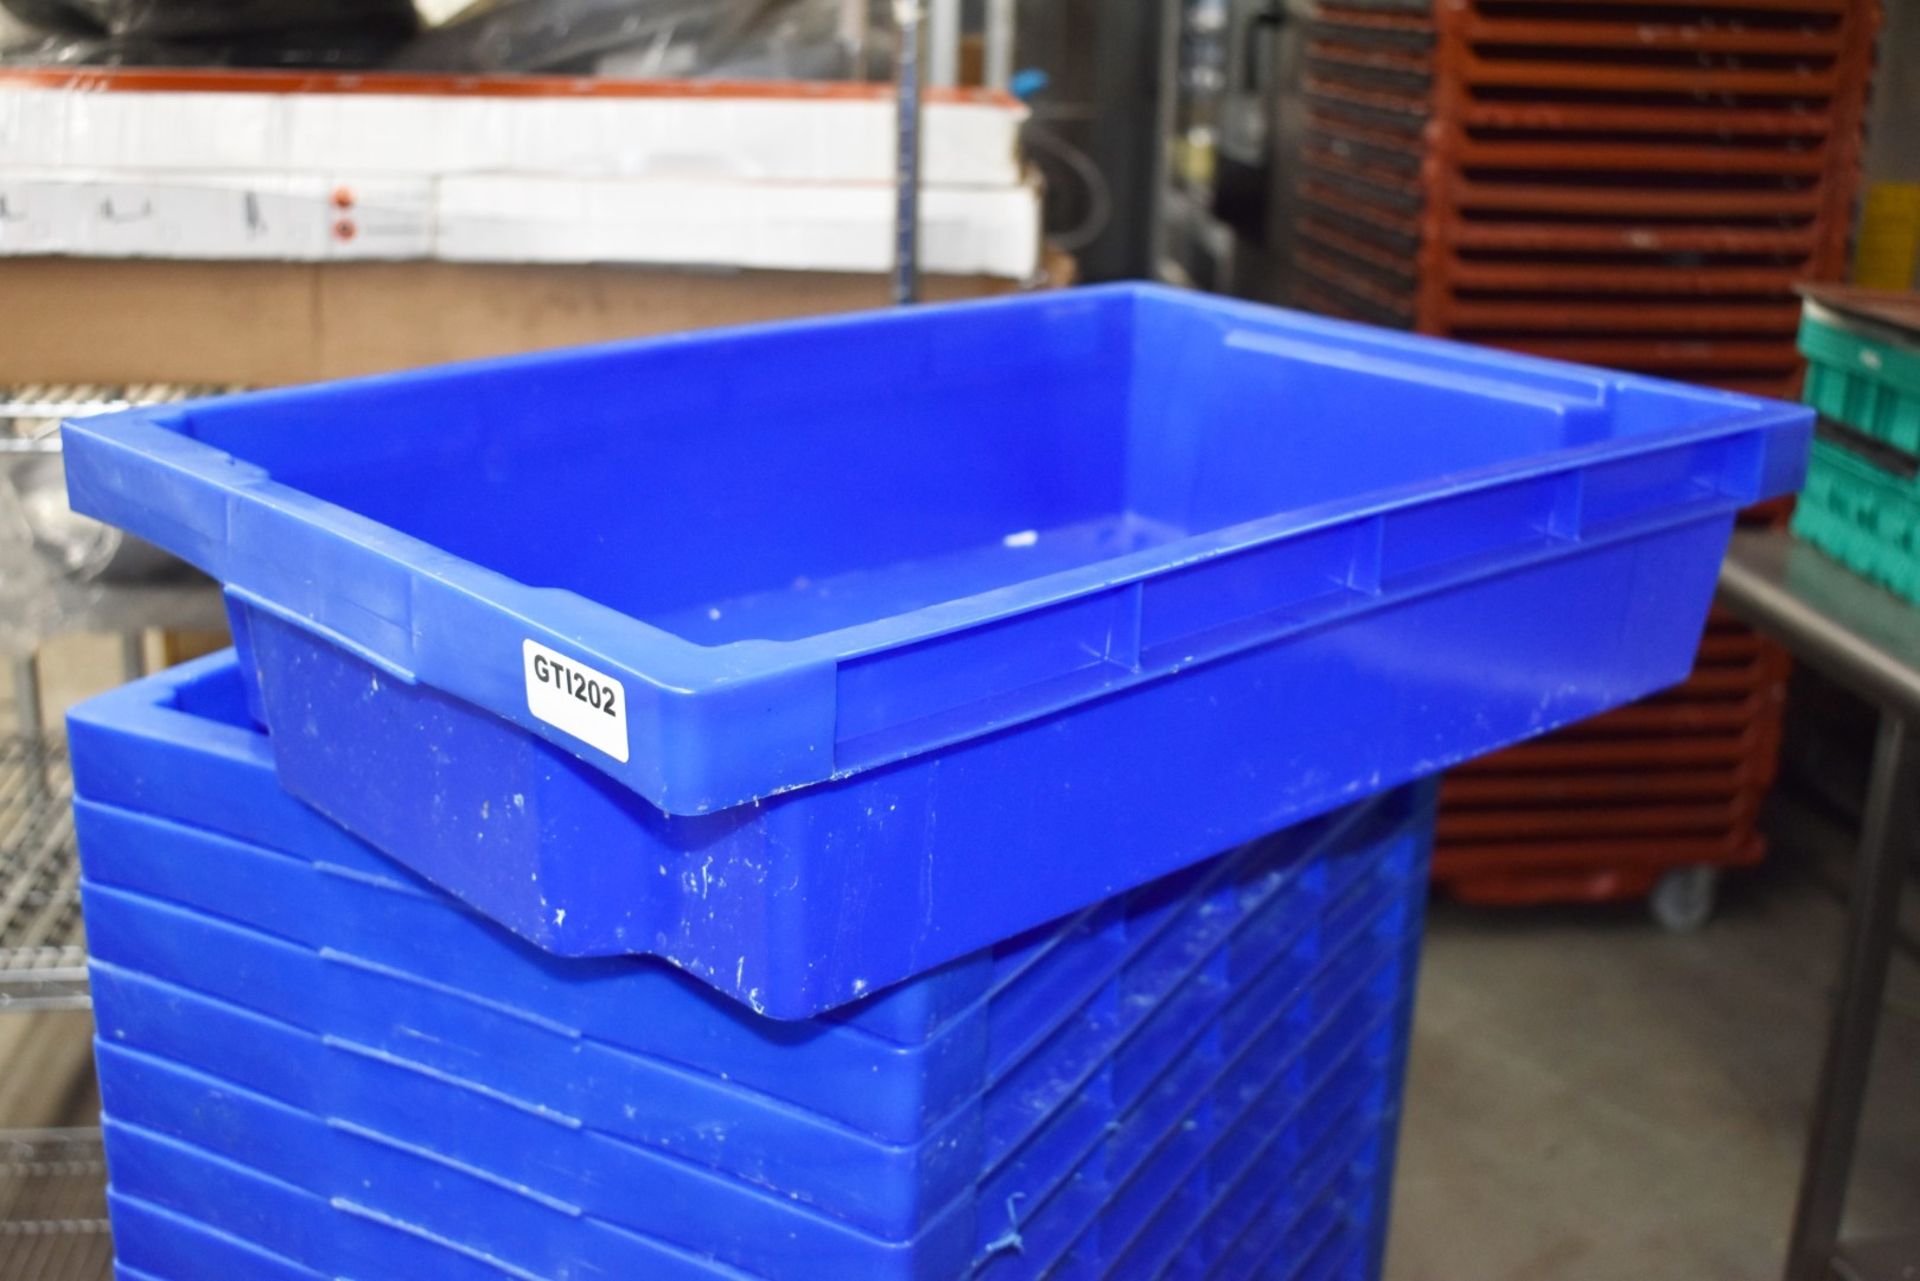 27 x Plastic Stackable Storage Trays in Blue - Includes Mobile Platform Dolly on Castors - Tray - Image 4 of 7